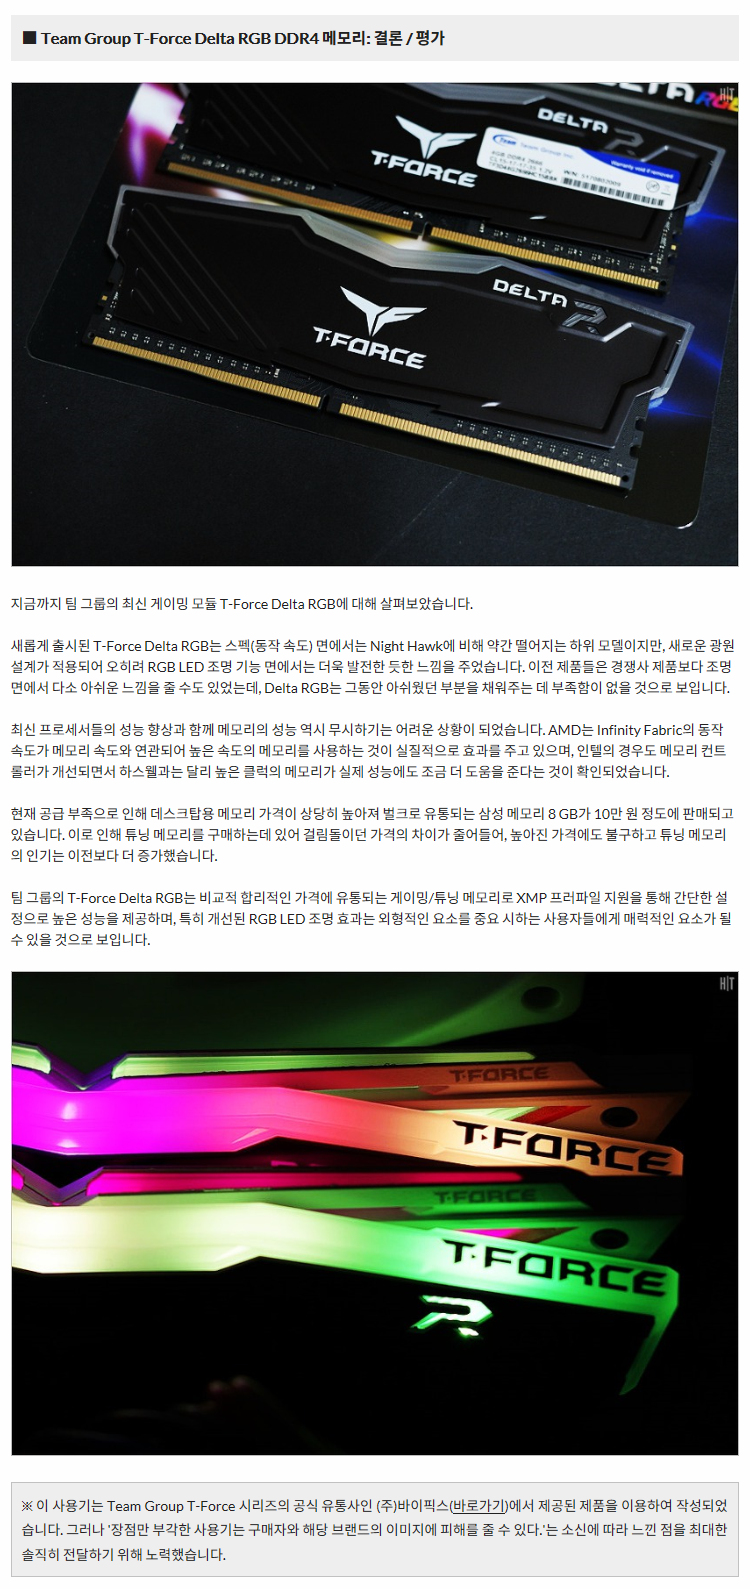 TeamGroup T-Force Delta RGB DDR4 - 8.jpg